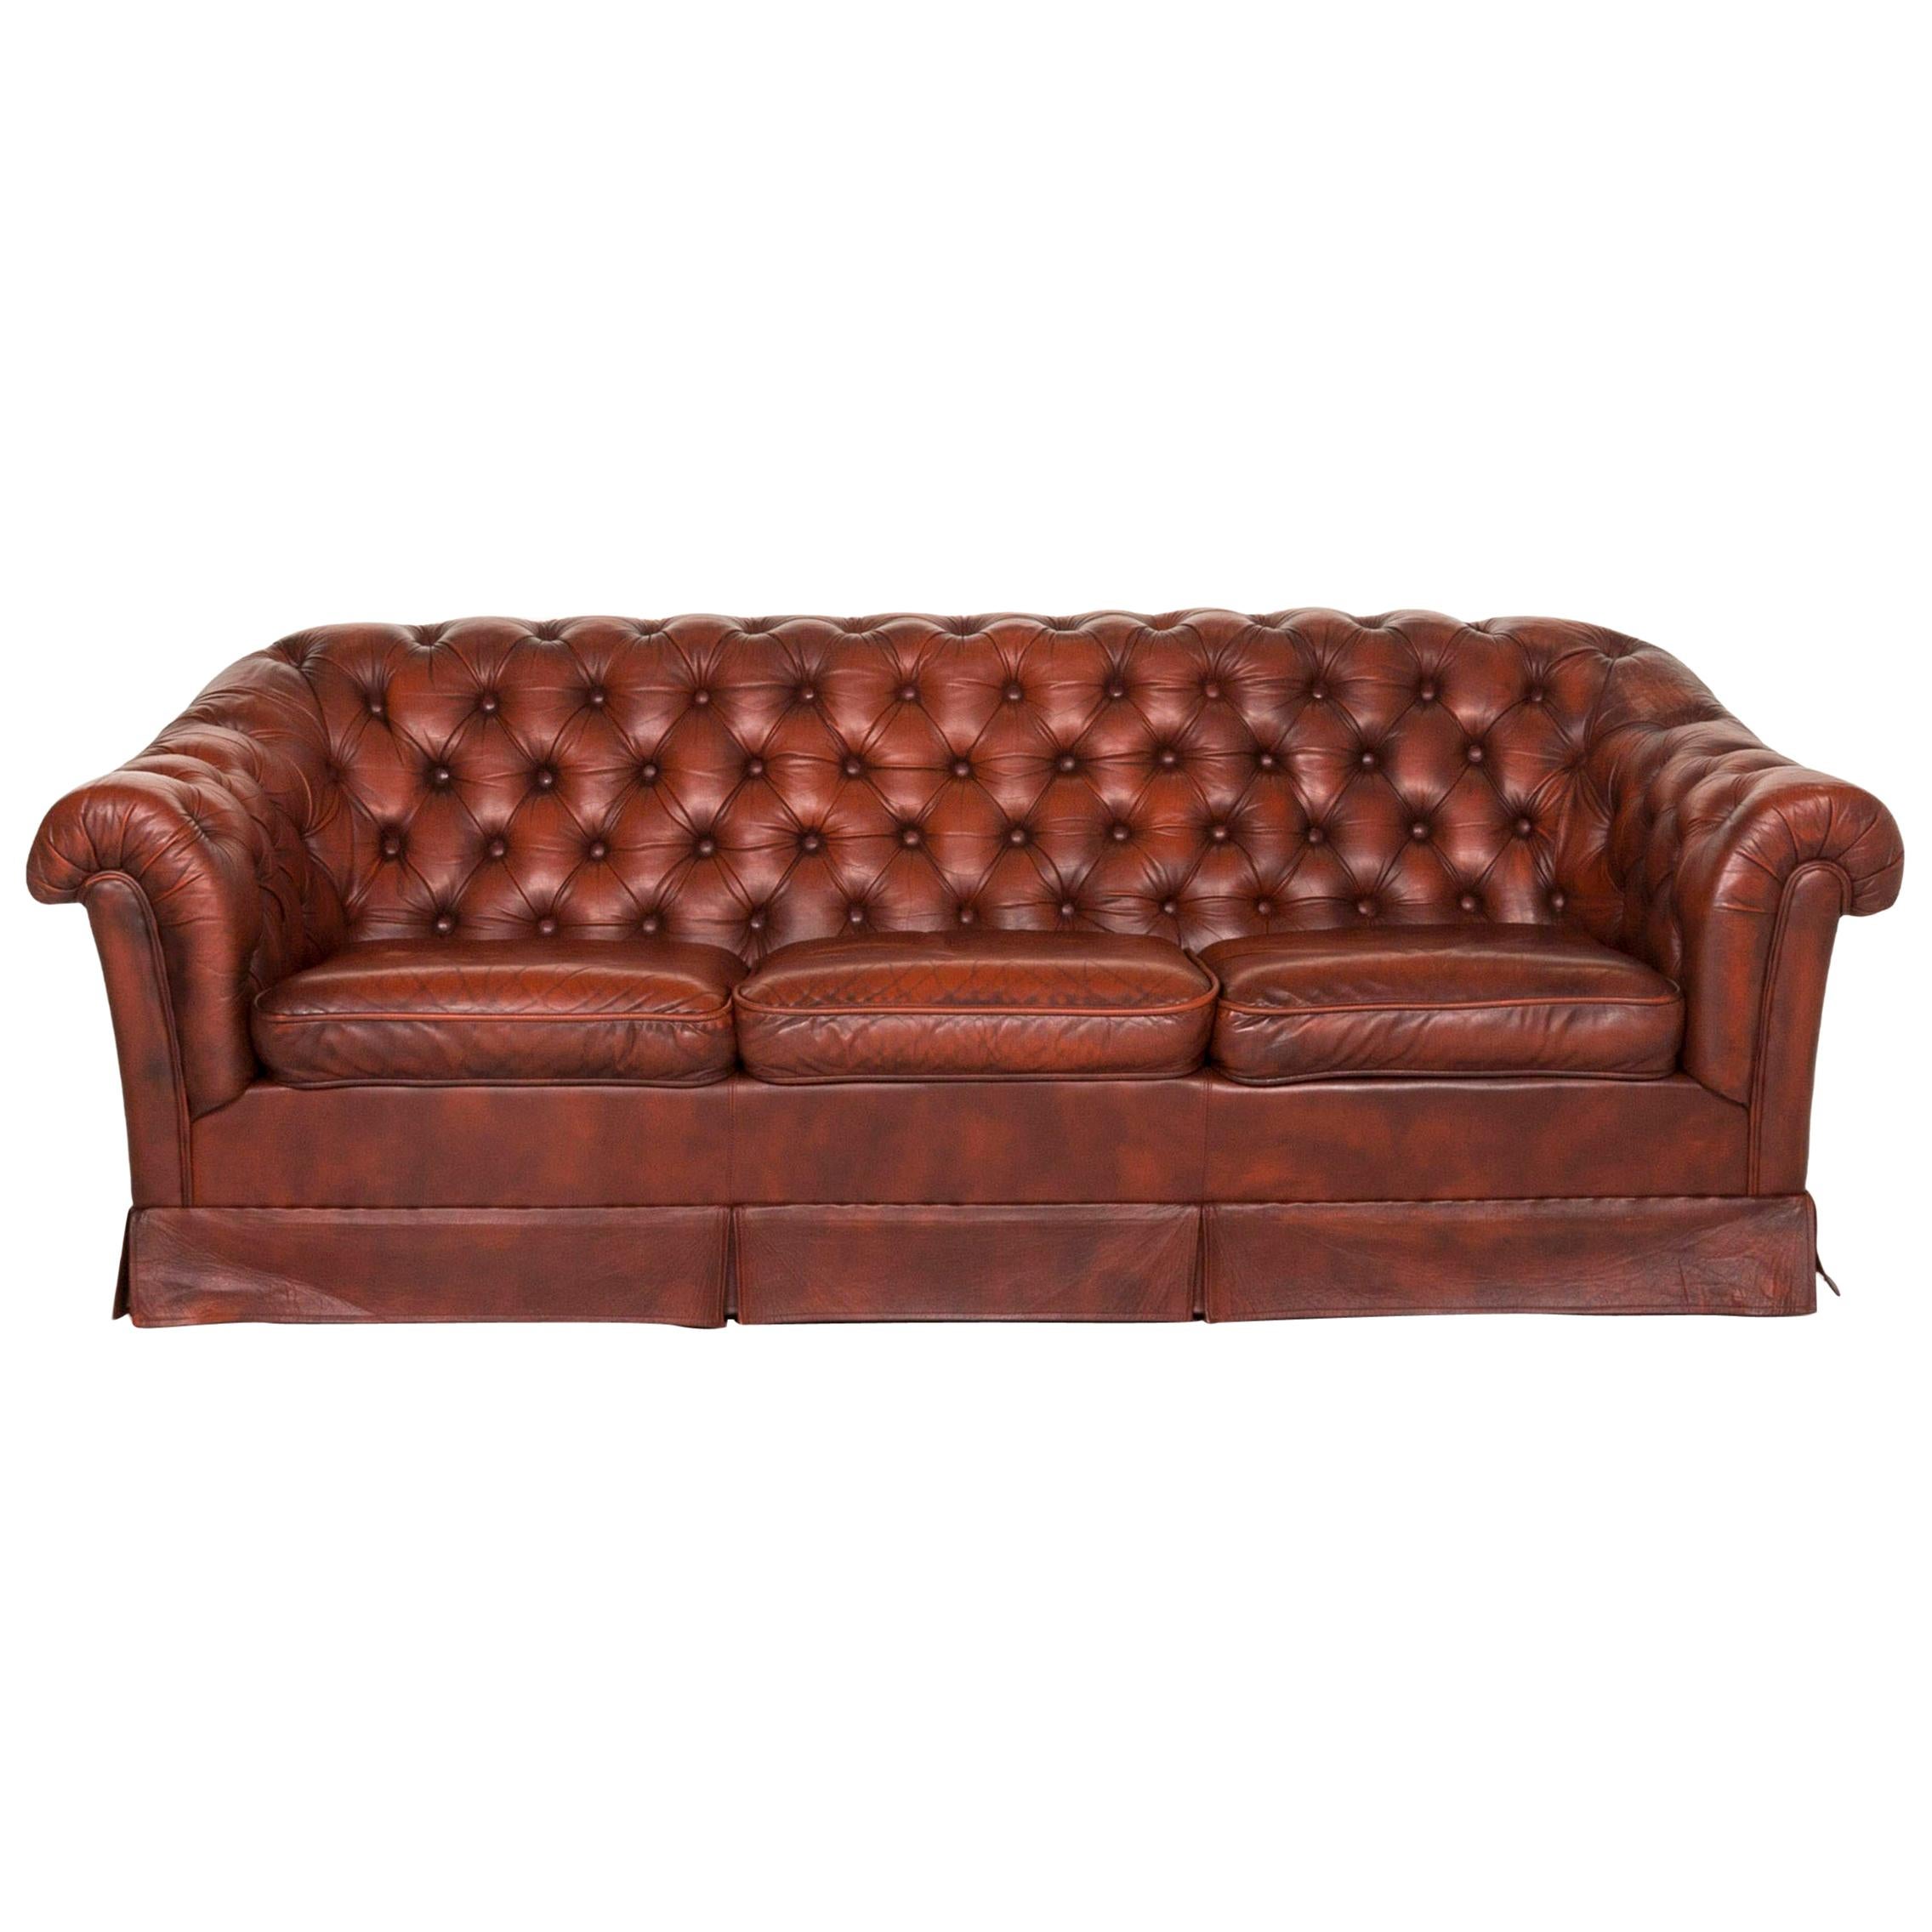 Chesterfield Leather Sofa Red Three-Seat Retro Vintage Couch For Sale